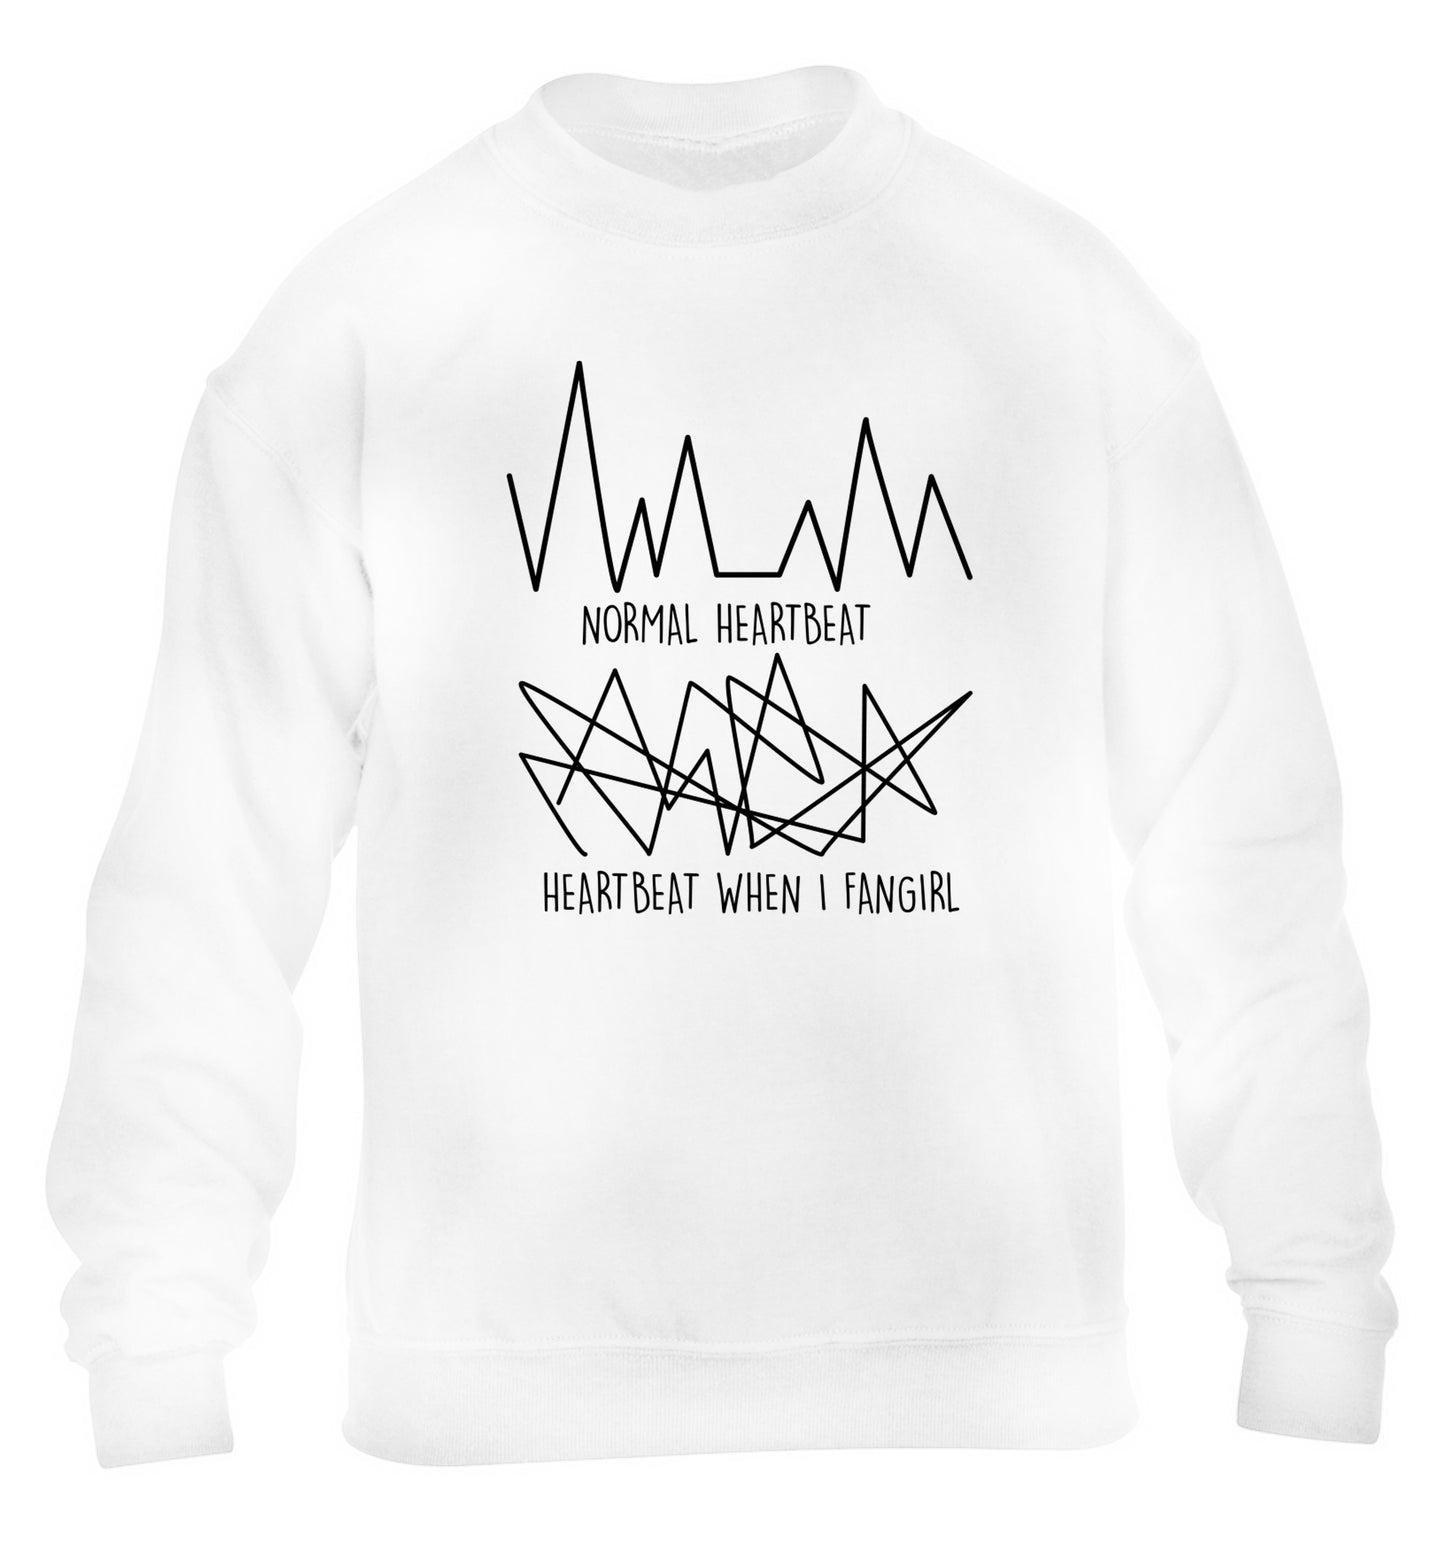 Normal heartbeat heartbeat when I fangirl children's white sweater 12-14 Years